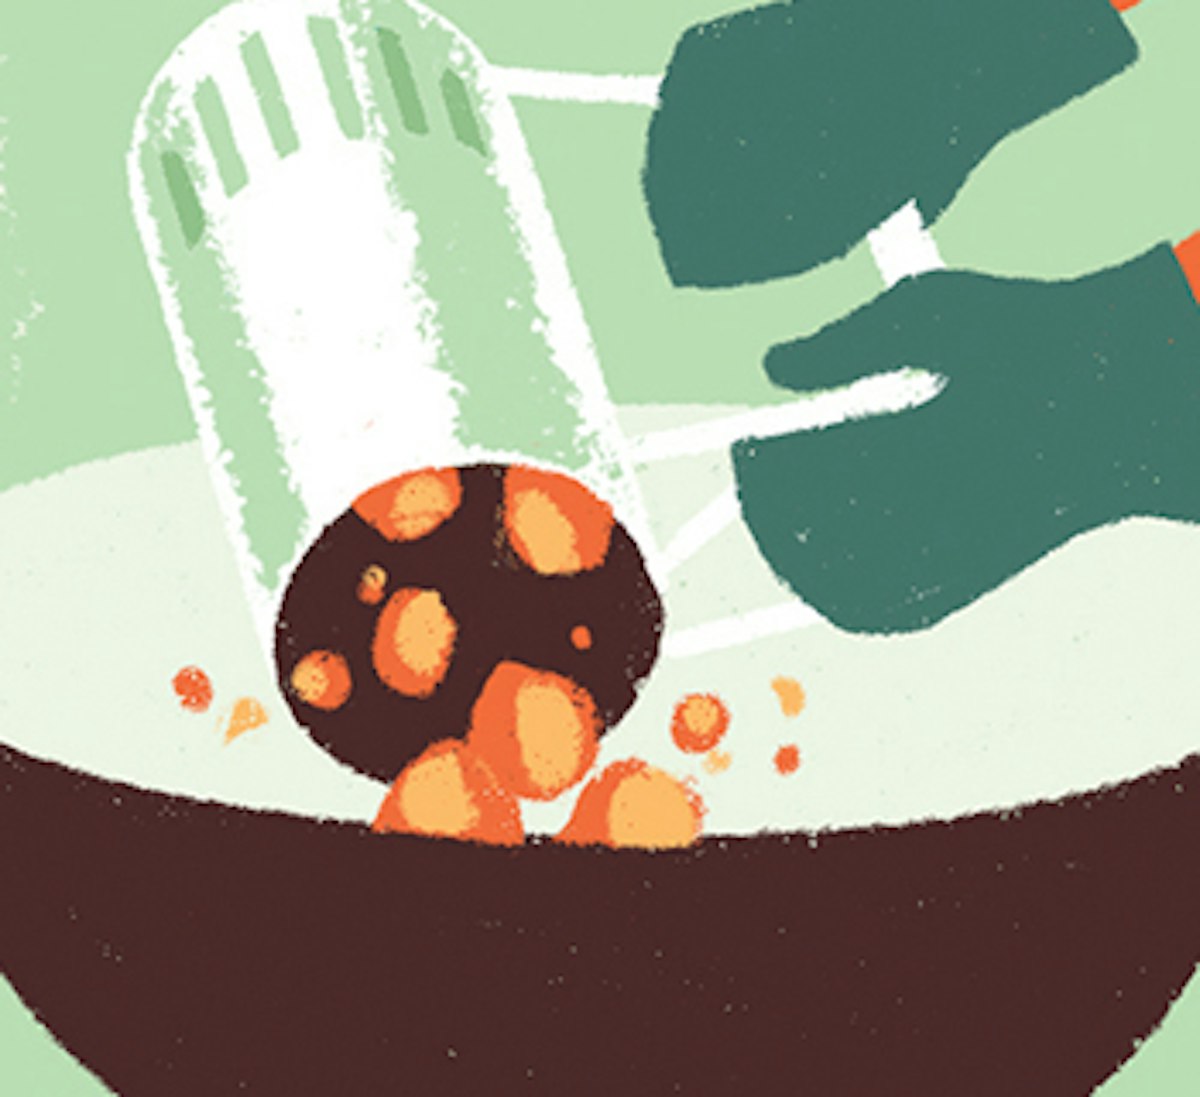 An illustration of a person pouring something into a bowl.